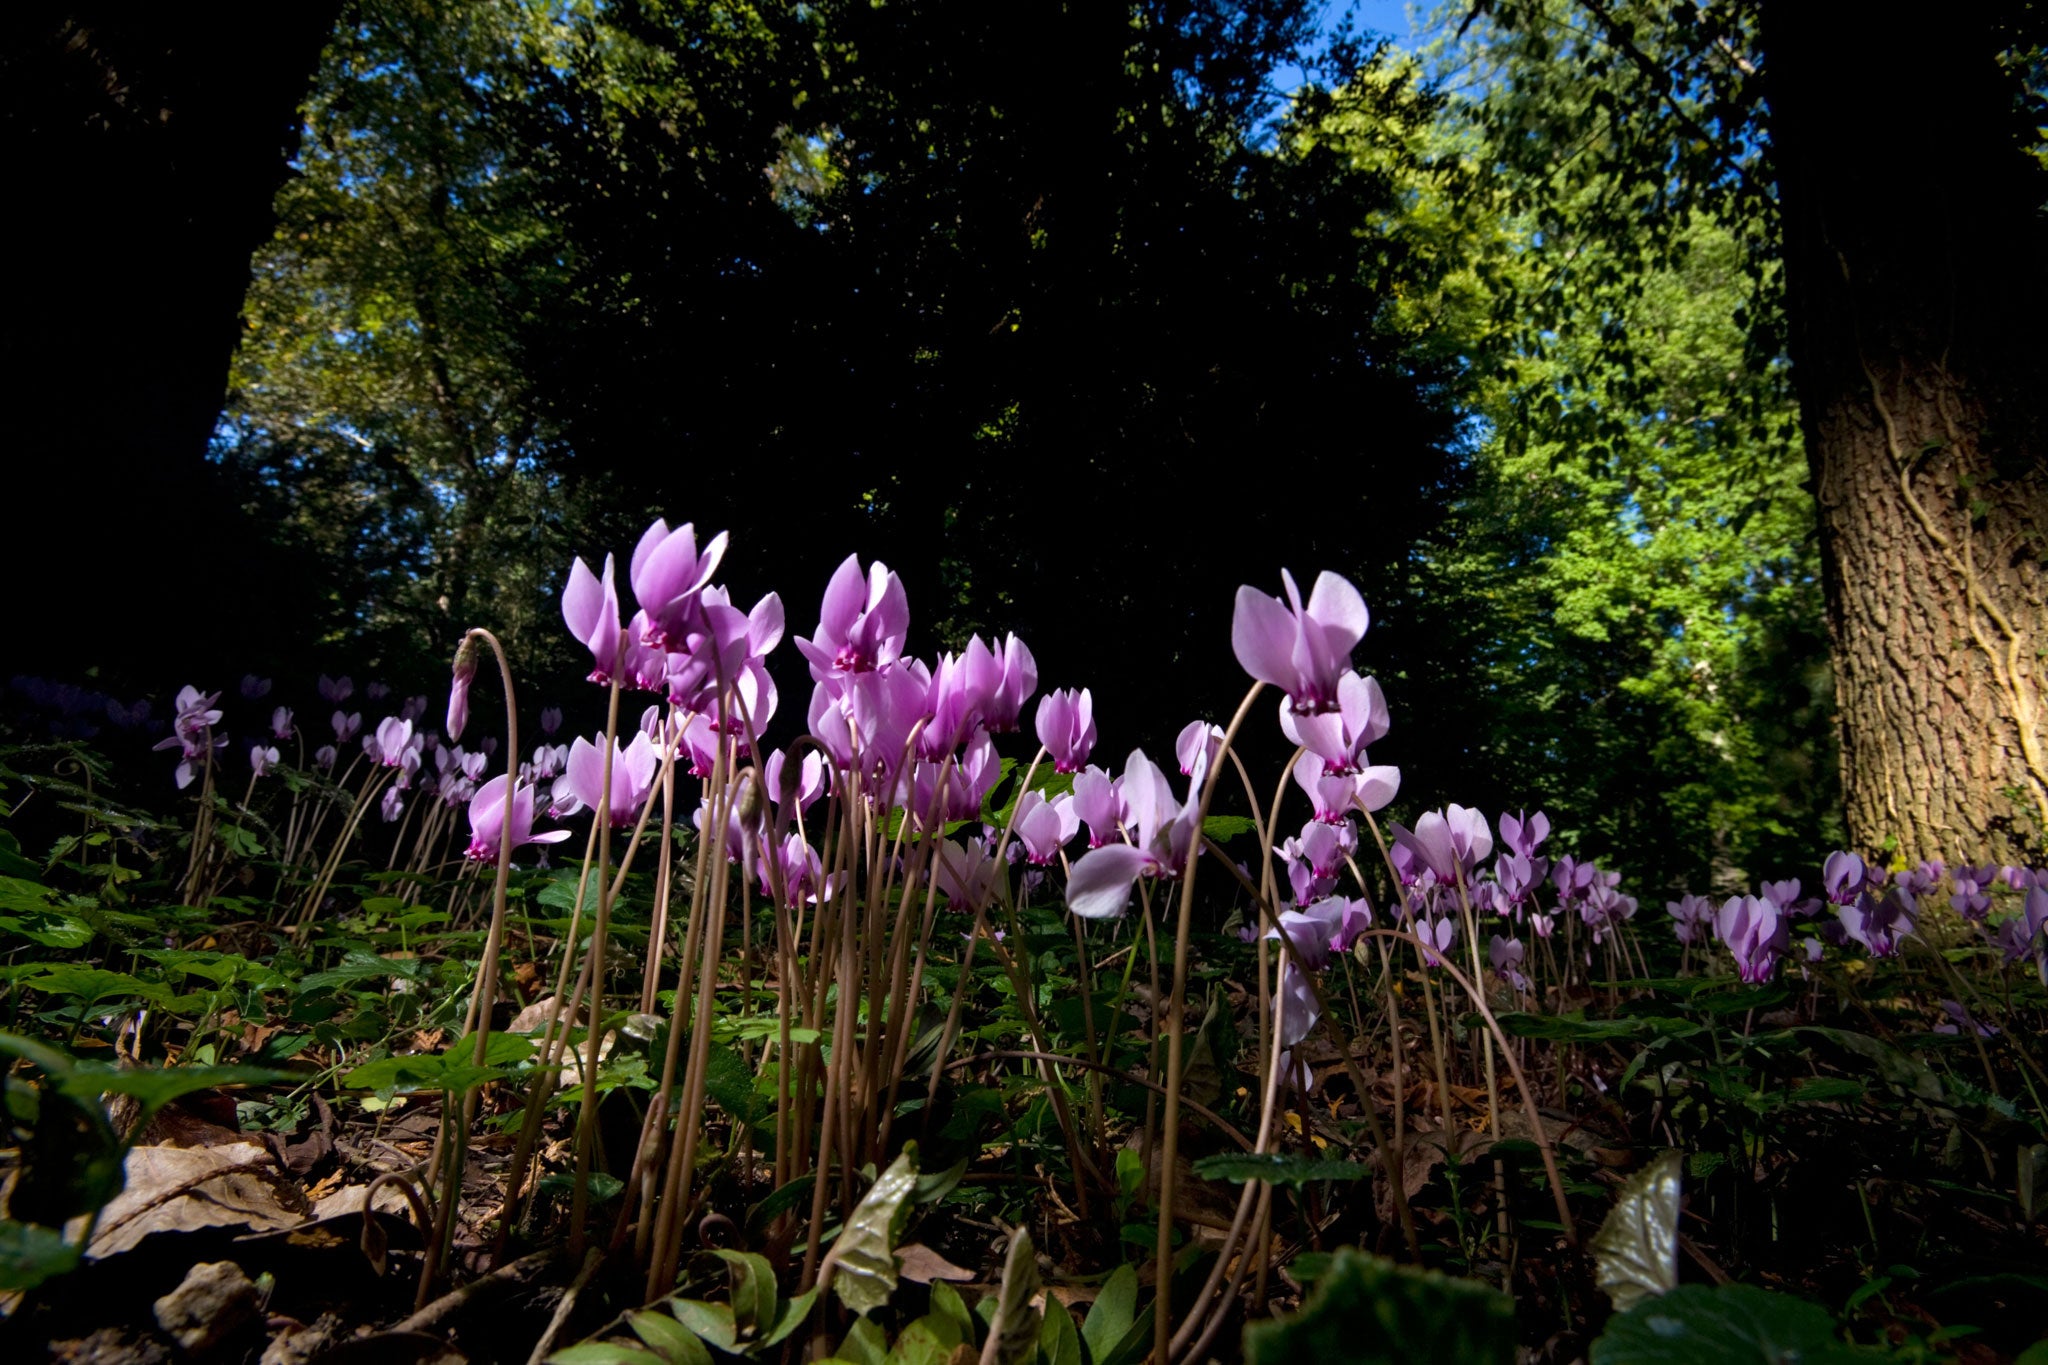 In the shade: Cyclamen nestled between trees